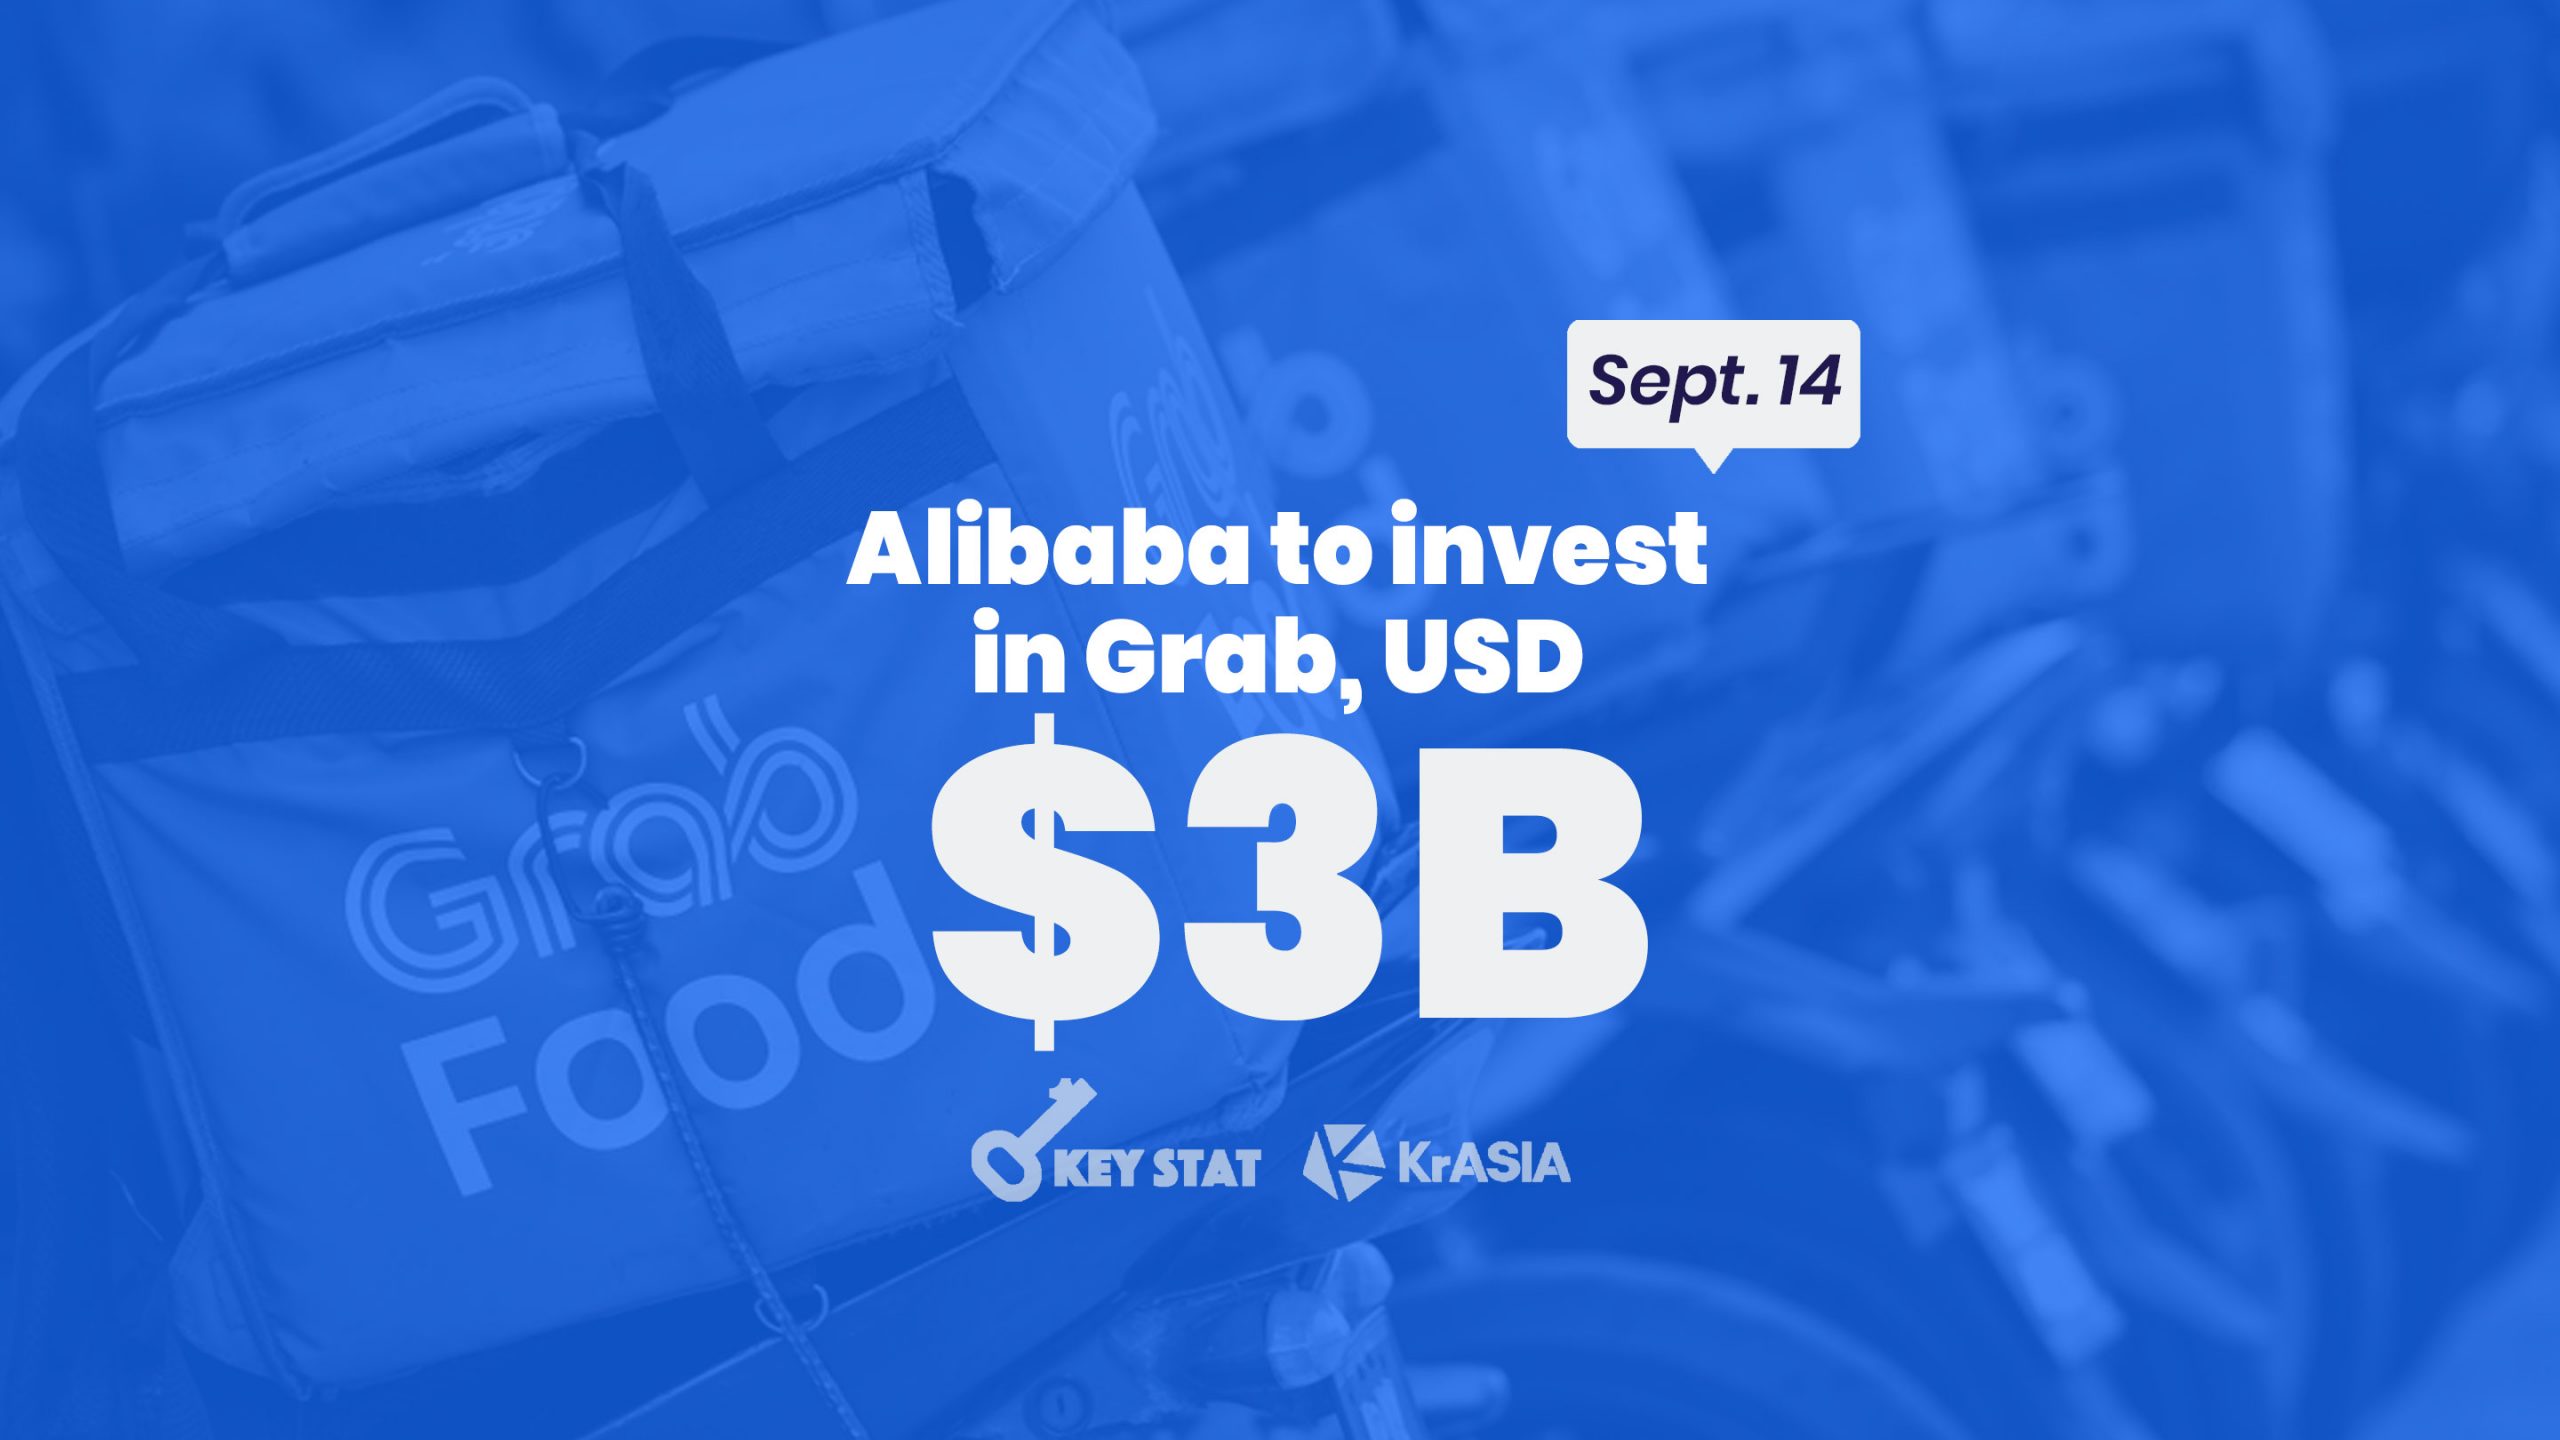 KEY STAT | Alibaba reportedly to invest USD 3 billion in Grab